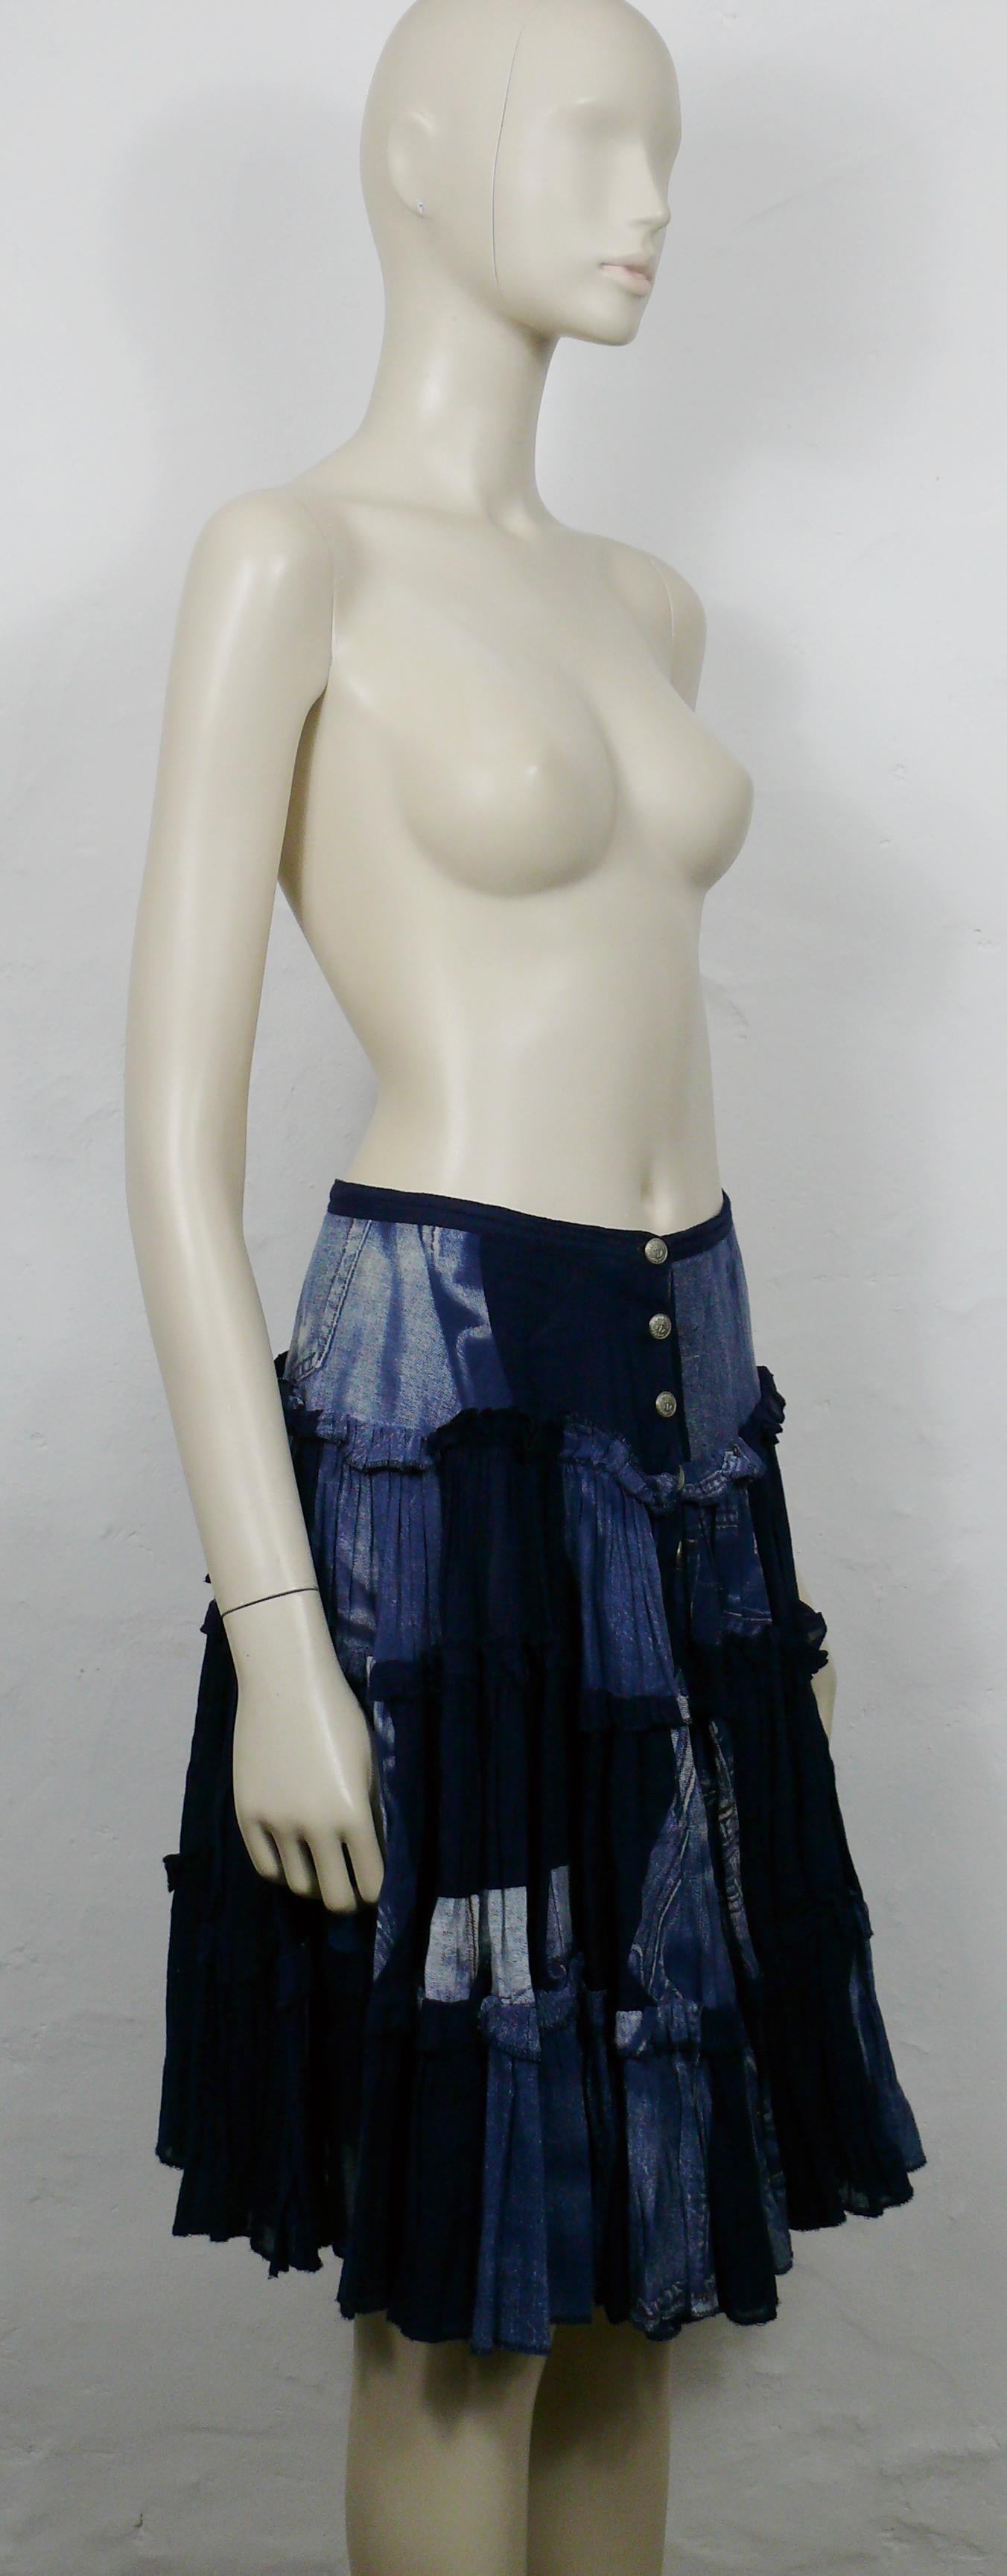 JEAN PAUL GAULTIER blue light cotton ruffle skirt featuring an X-RAY screen trompe l’œil jeans on front and back.

Knee length.
Front buttoning.
No lining.

Label reads GAULTIER JEAN'S Haute Jeanerie Tailored.
Made in Romania.

Size tag reads :